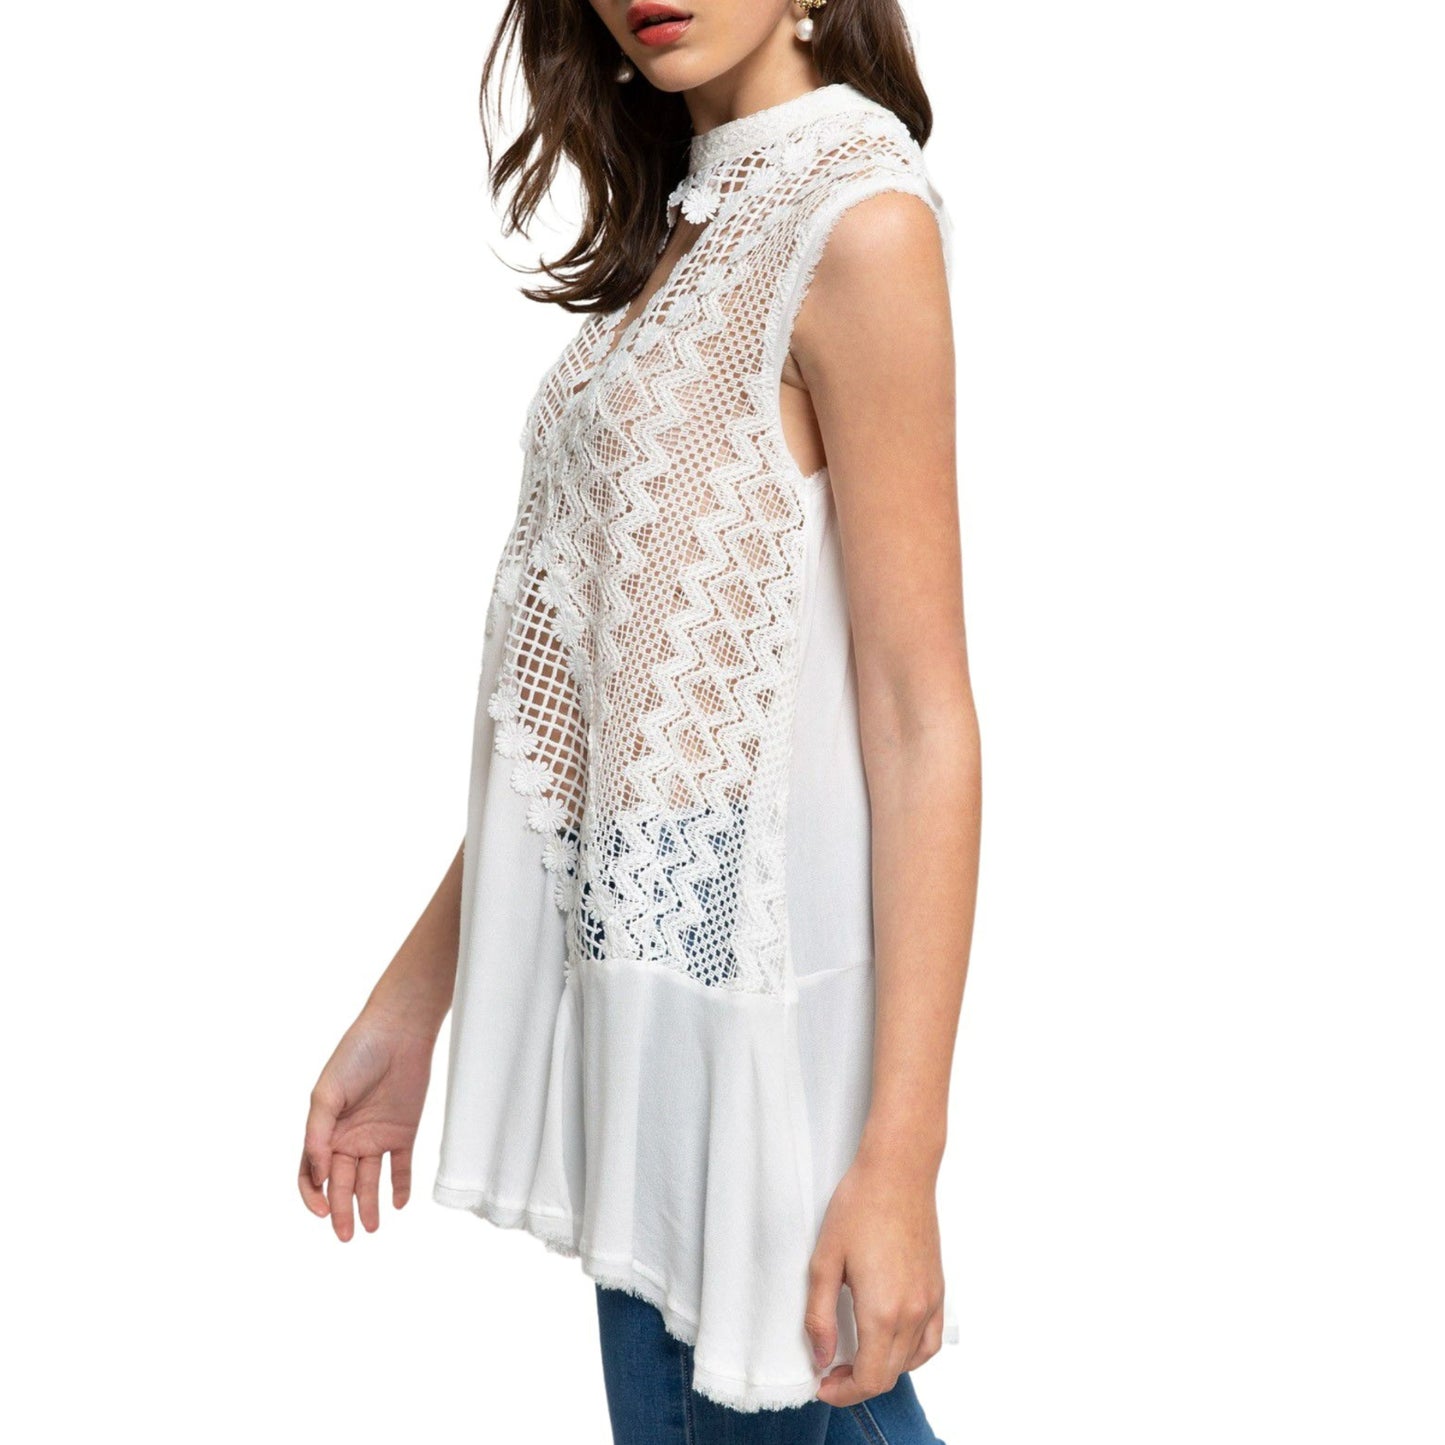 POL Crochet Lace High Neck with Keyhole Flowy Blouse Tunic Top